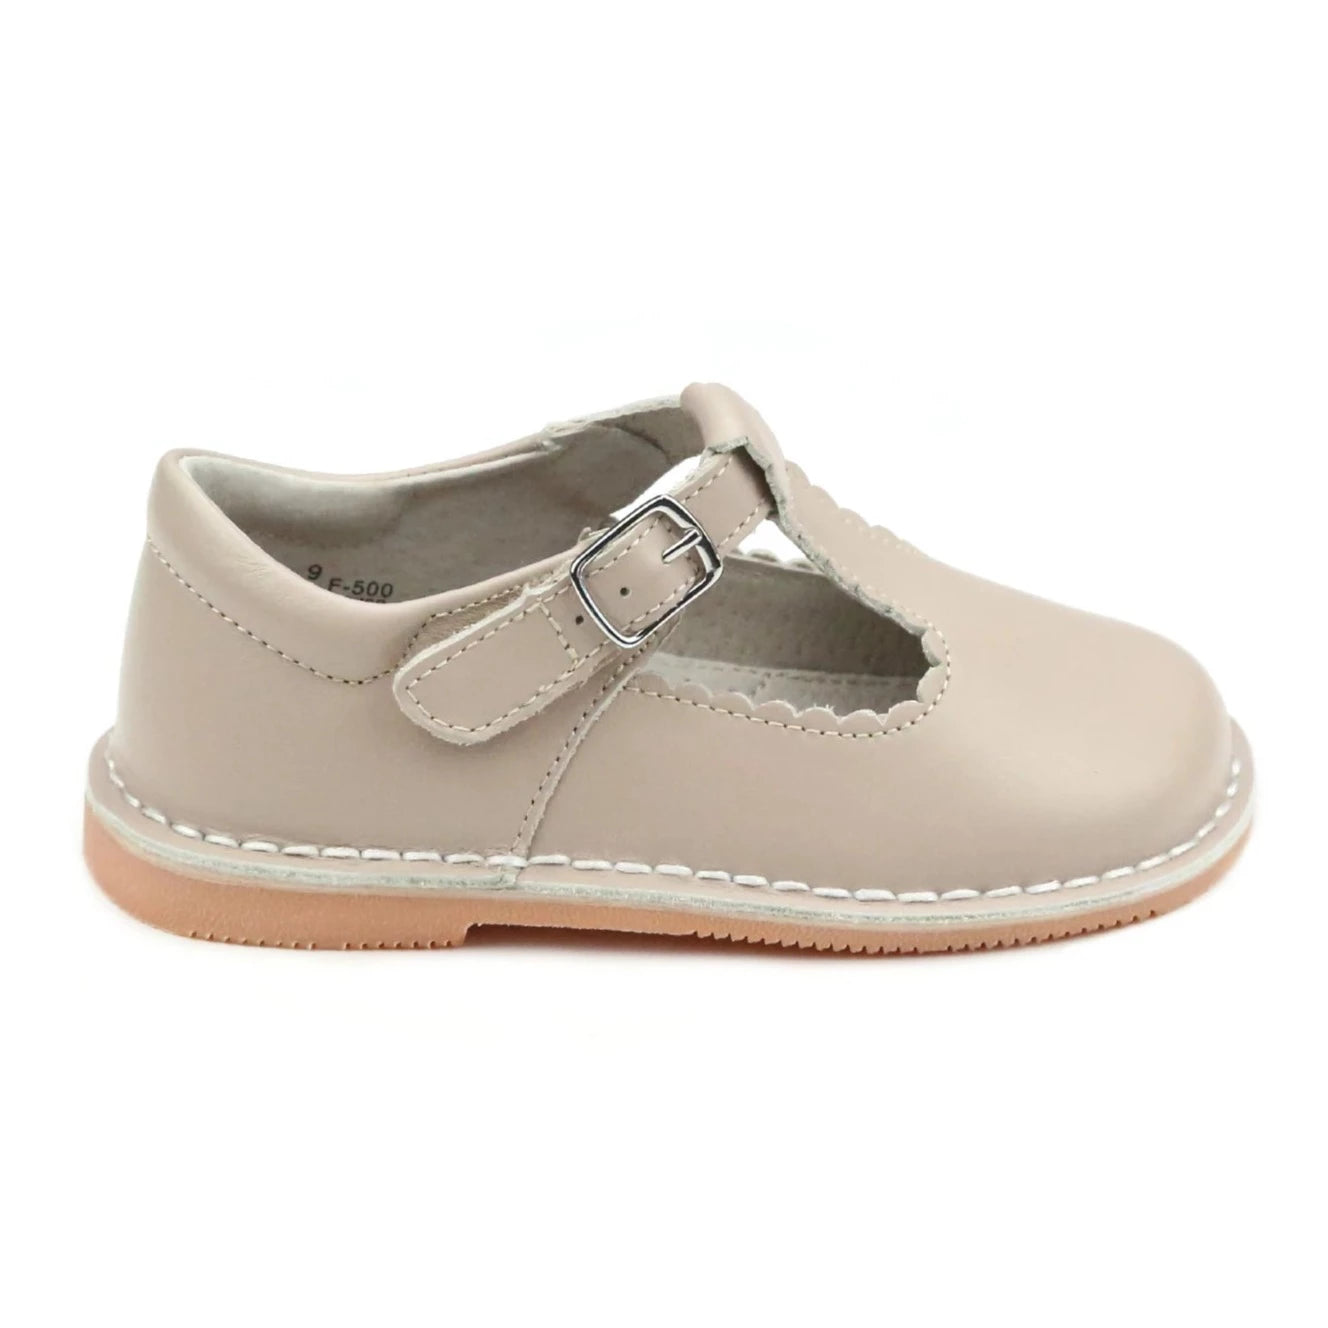 L'Amour Selina Scalloped T-Strap Mary Jane